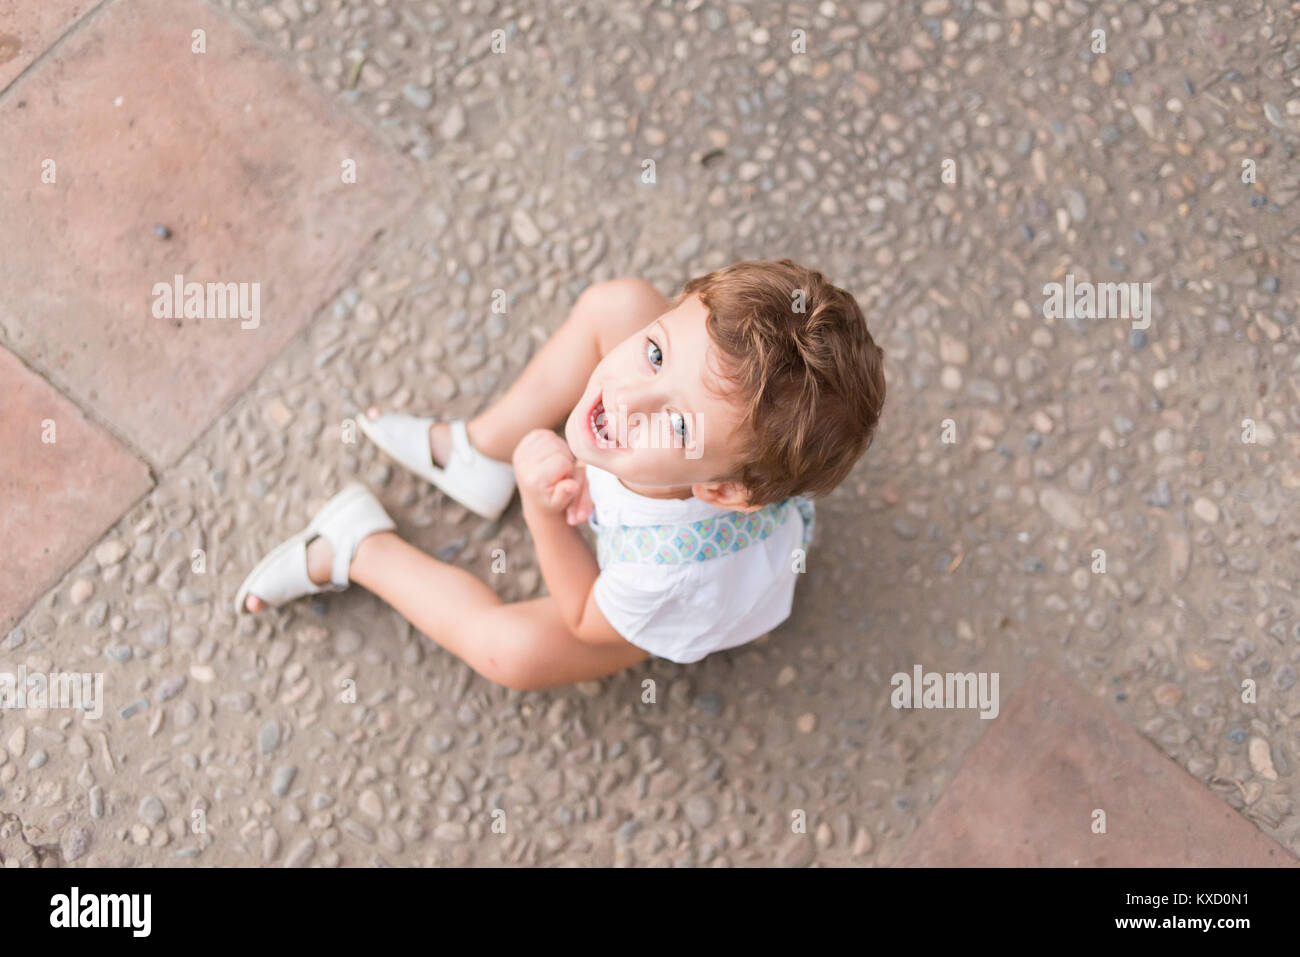 Color photograph, in overhead shot, of a boy sitting on the floor looking towards the camera and smiling. Stock Photo